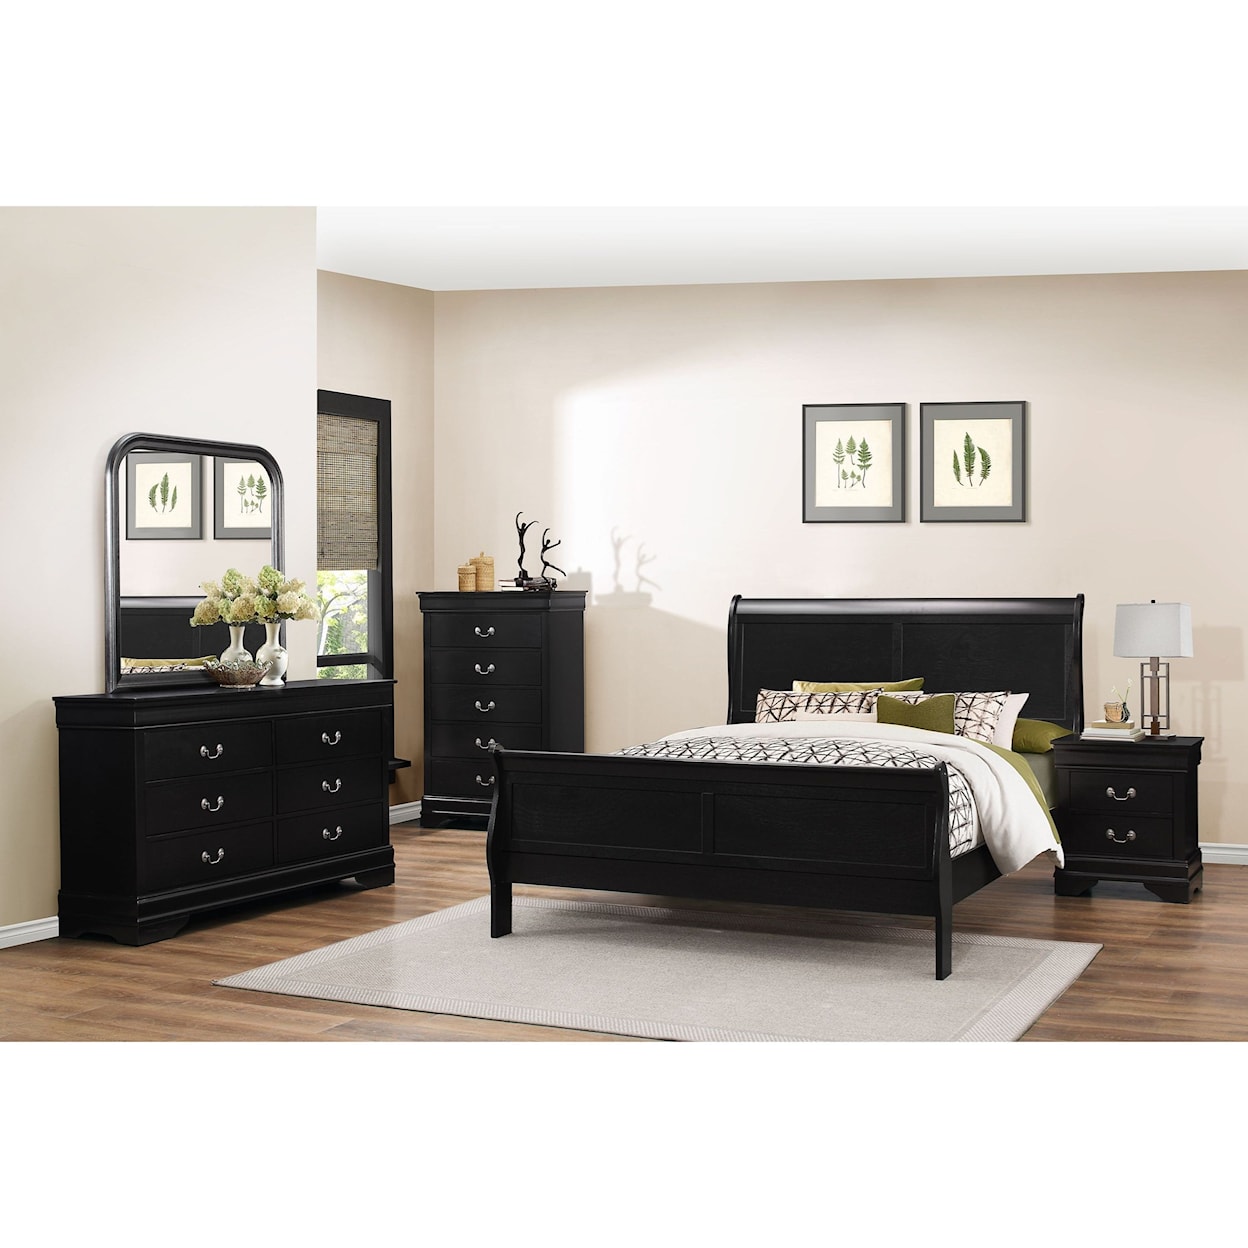 Lifestyle 4937 5 Piece Twin Bedroom Set with Chest